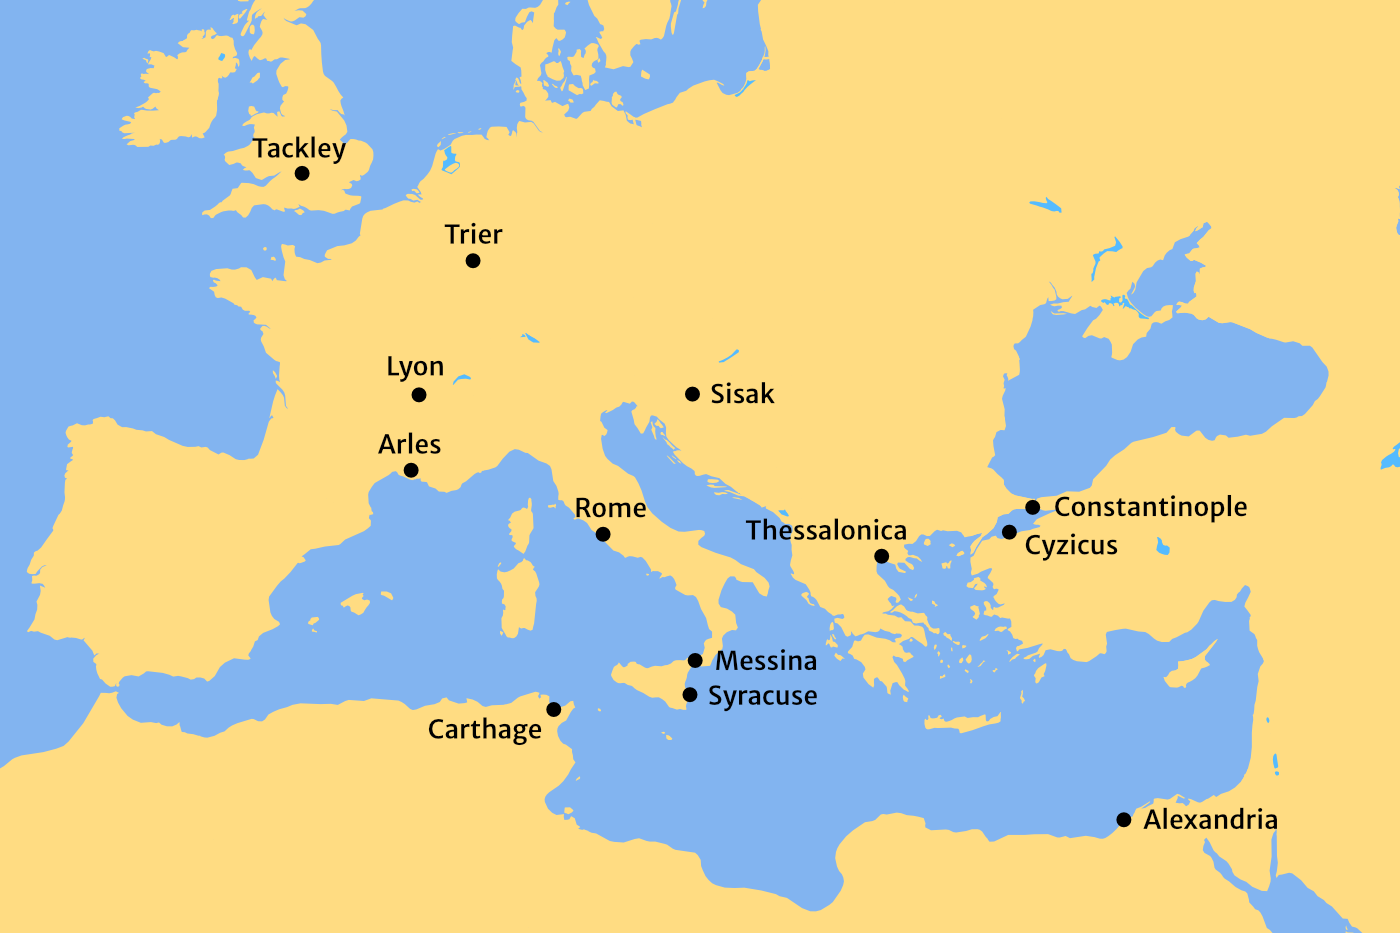 Map of Europe and the Mediterranean pinpointing the origins of coins found in Tackley.